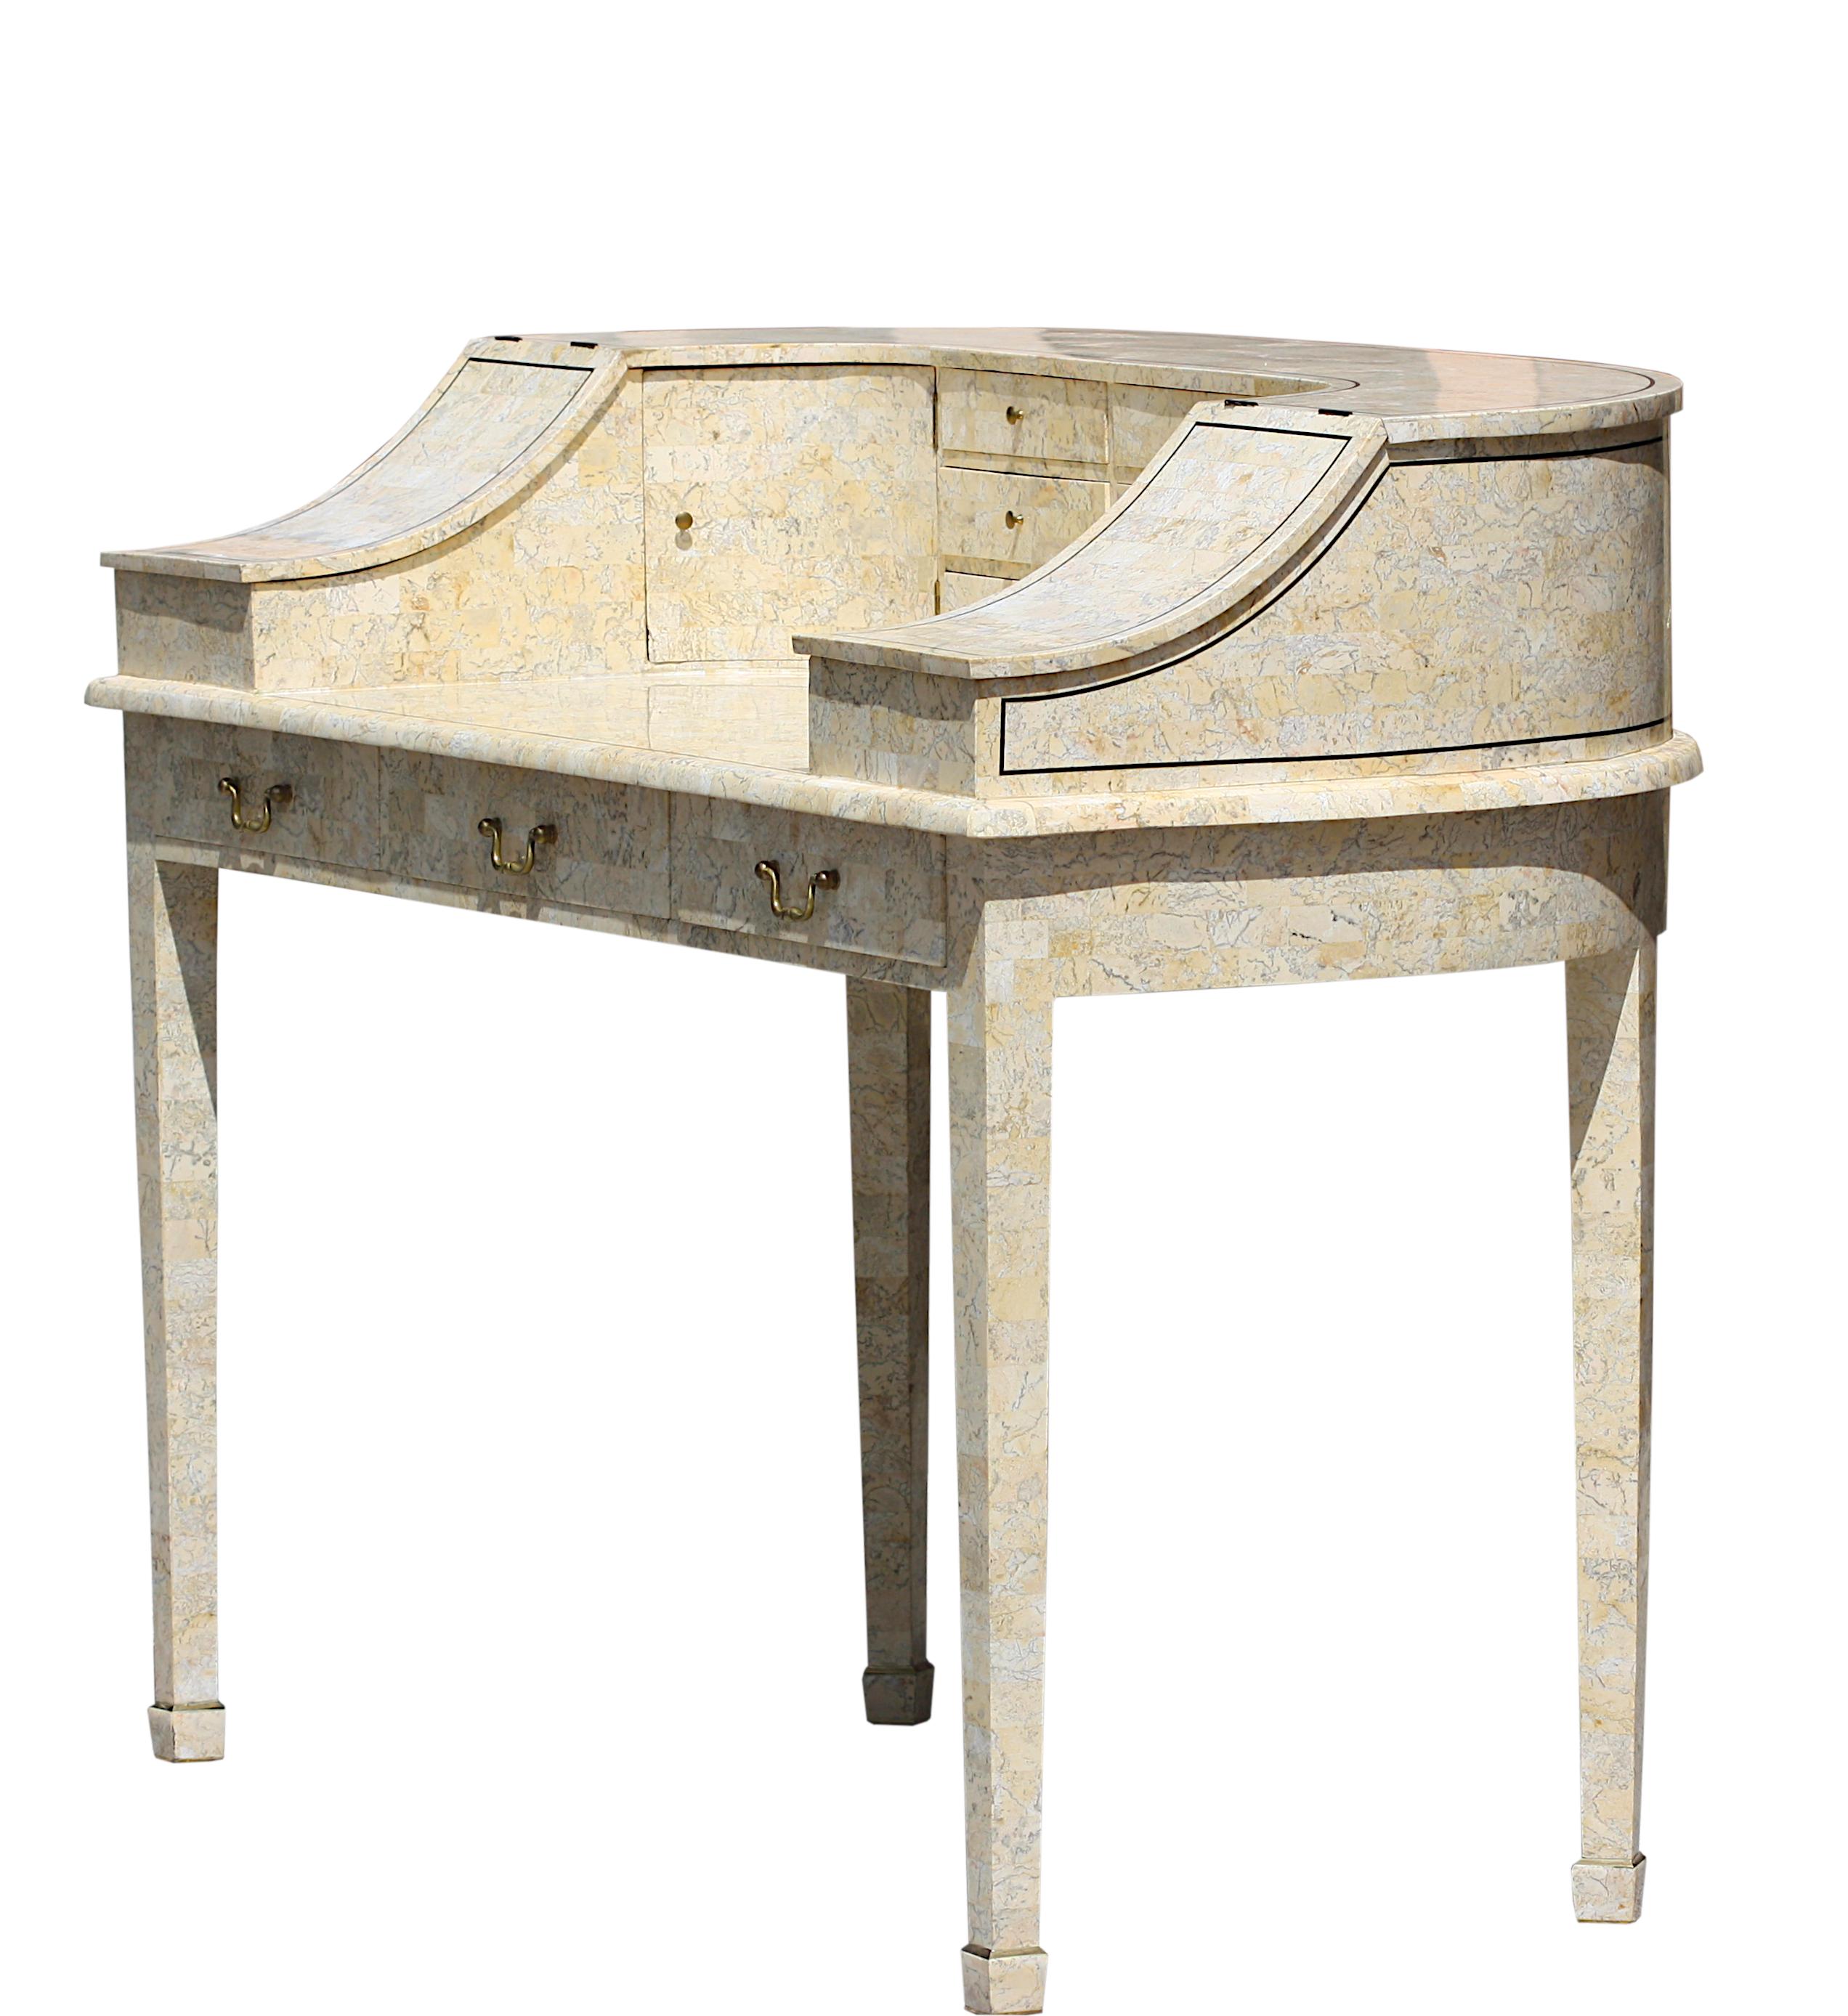 Contemporary Tessellated Stone Carlton House Desk
Maitland Smith. The U-shaped superstructure was fitted with small drawers and two hinged covers, centering a molded top, above a frieze fitted with drawers, on squared straight tapered legs ending in